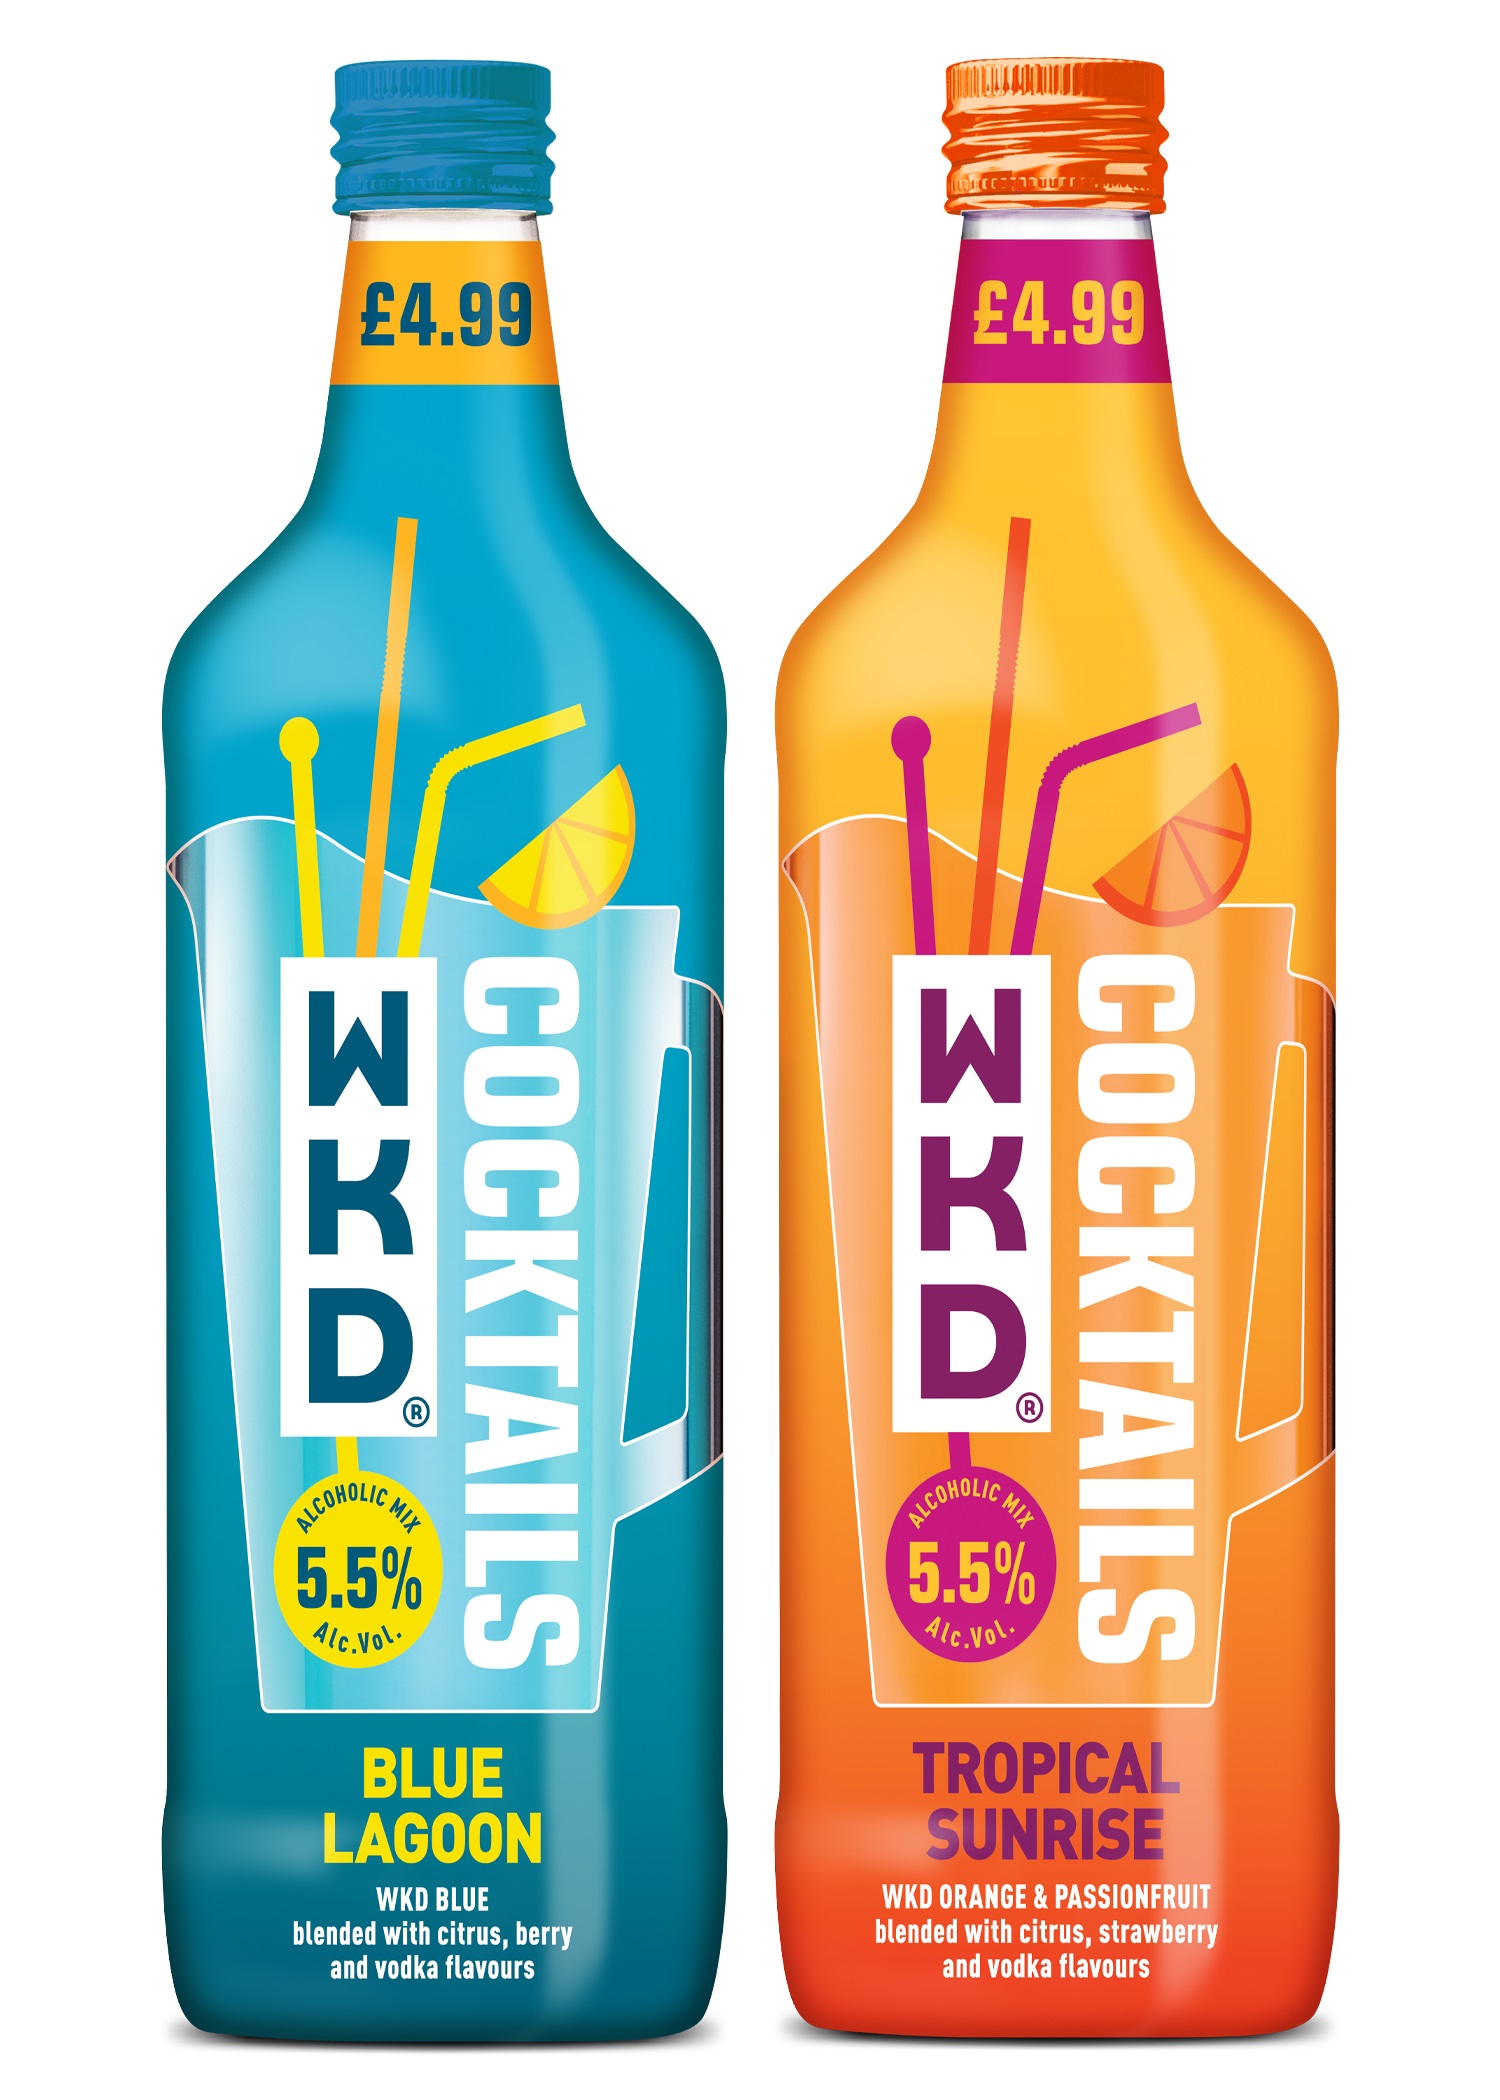 New WKD cocktails: “all the fun, none of the faff”